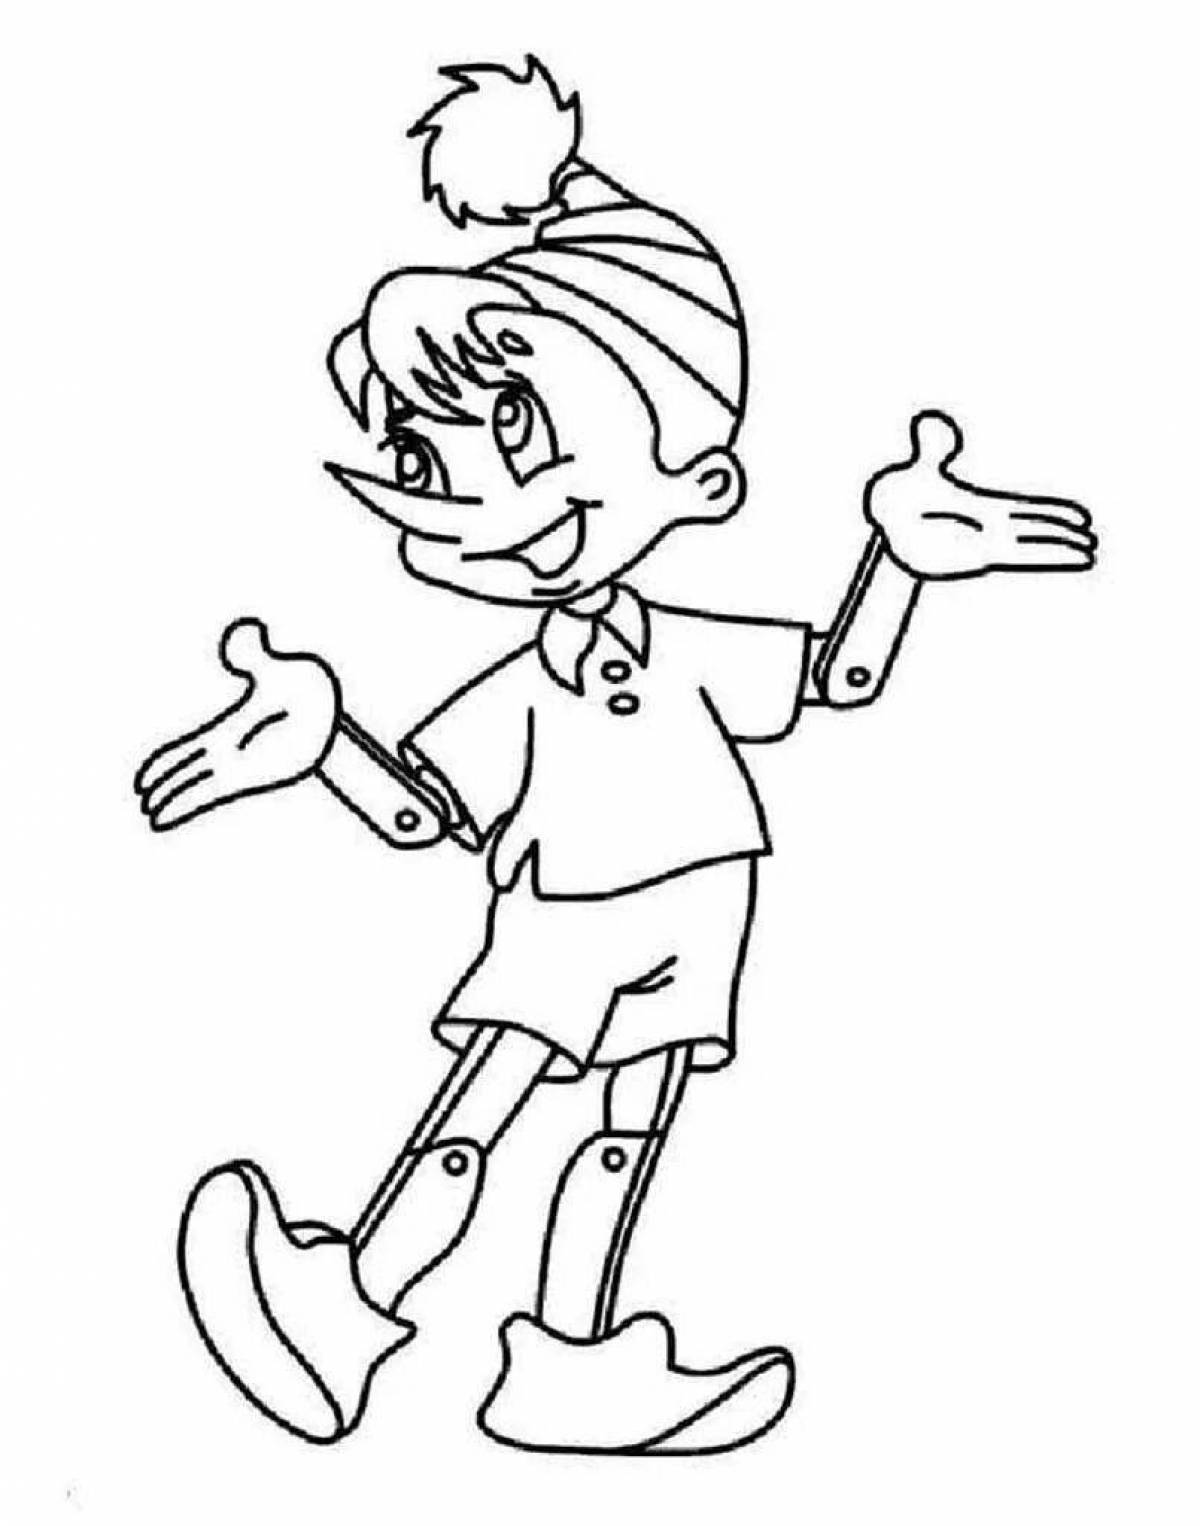 Charming drawing of pinocchio